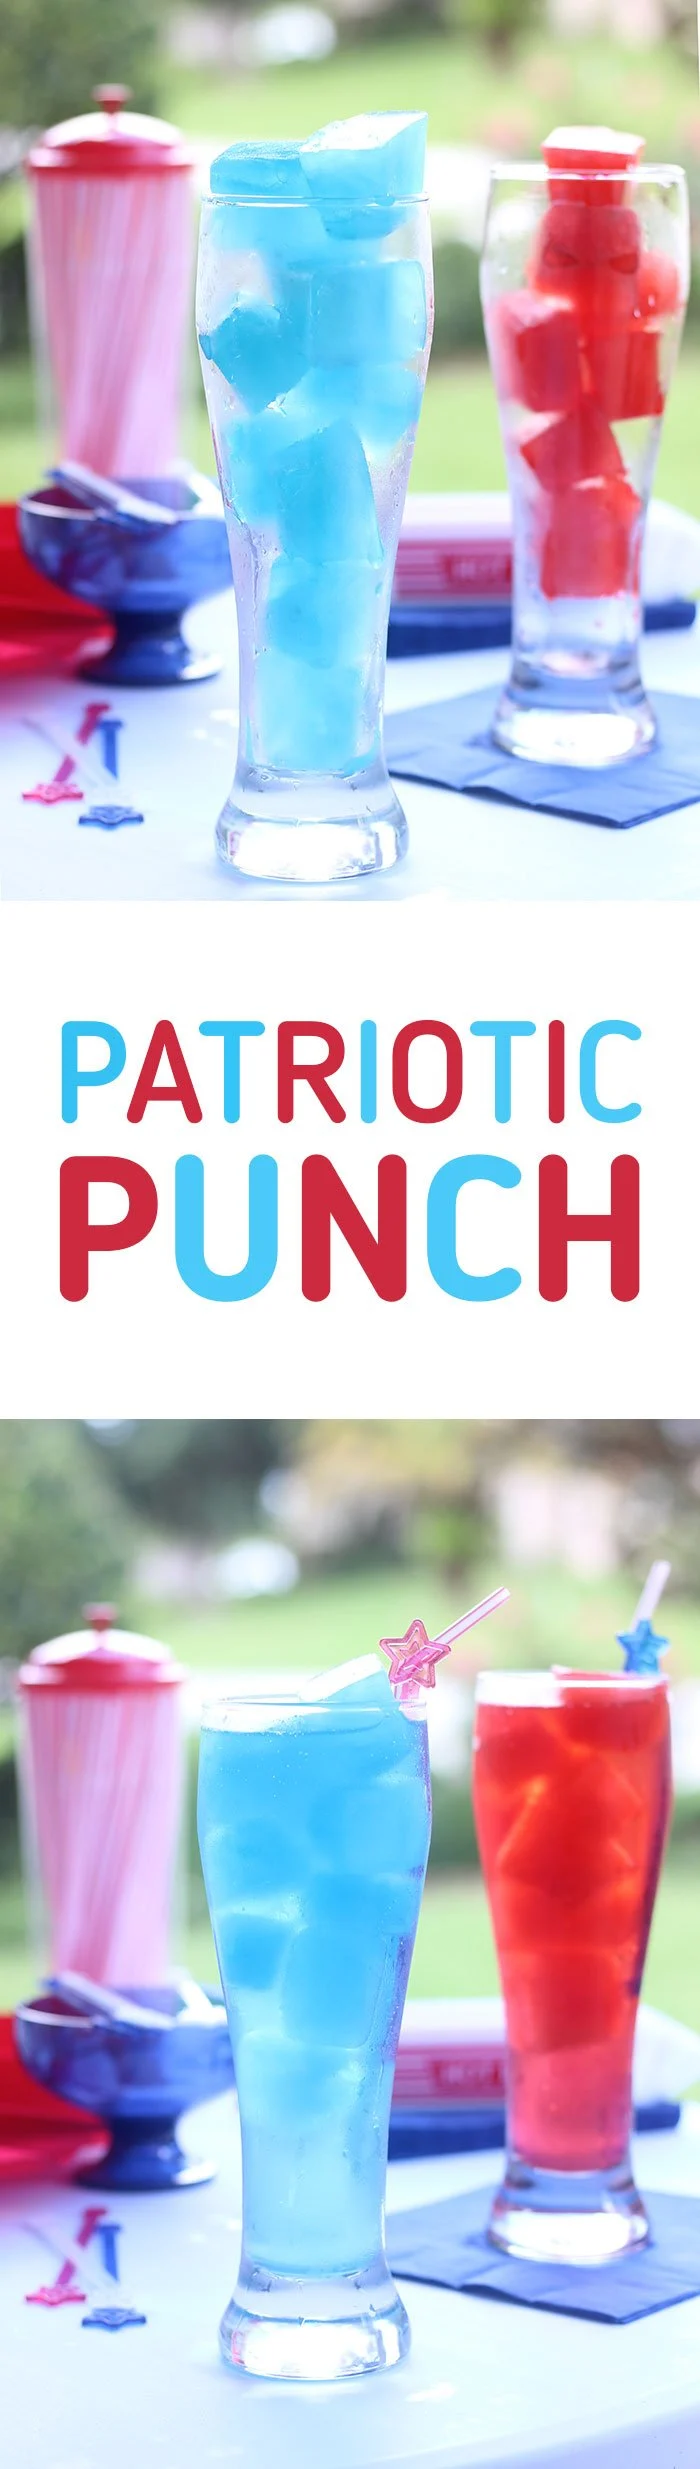 Patriotic Punch - kid friendly. Make colorful juice ice cubes and just add soda for the perfect and simple Labor day recipe.